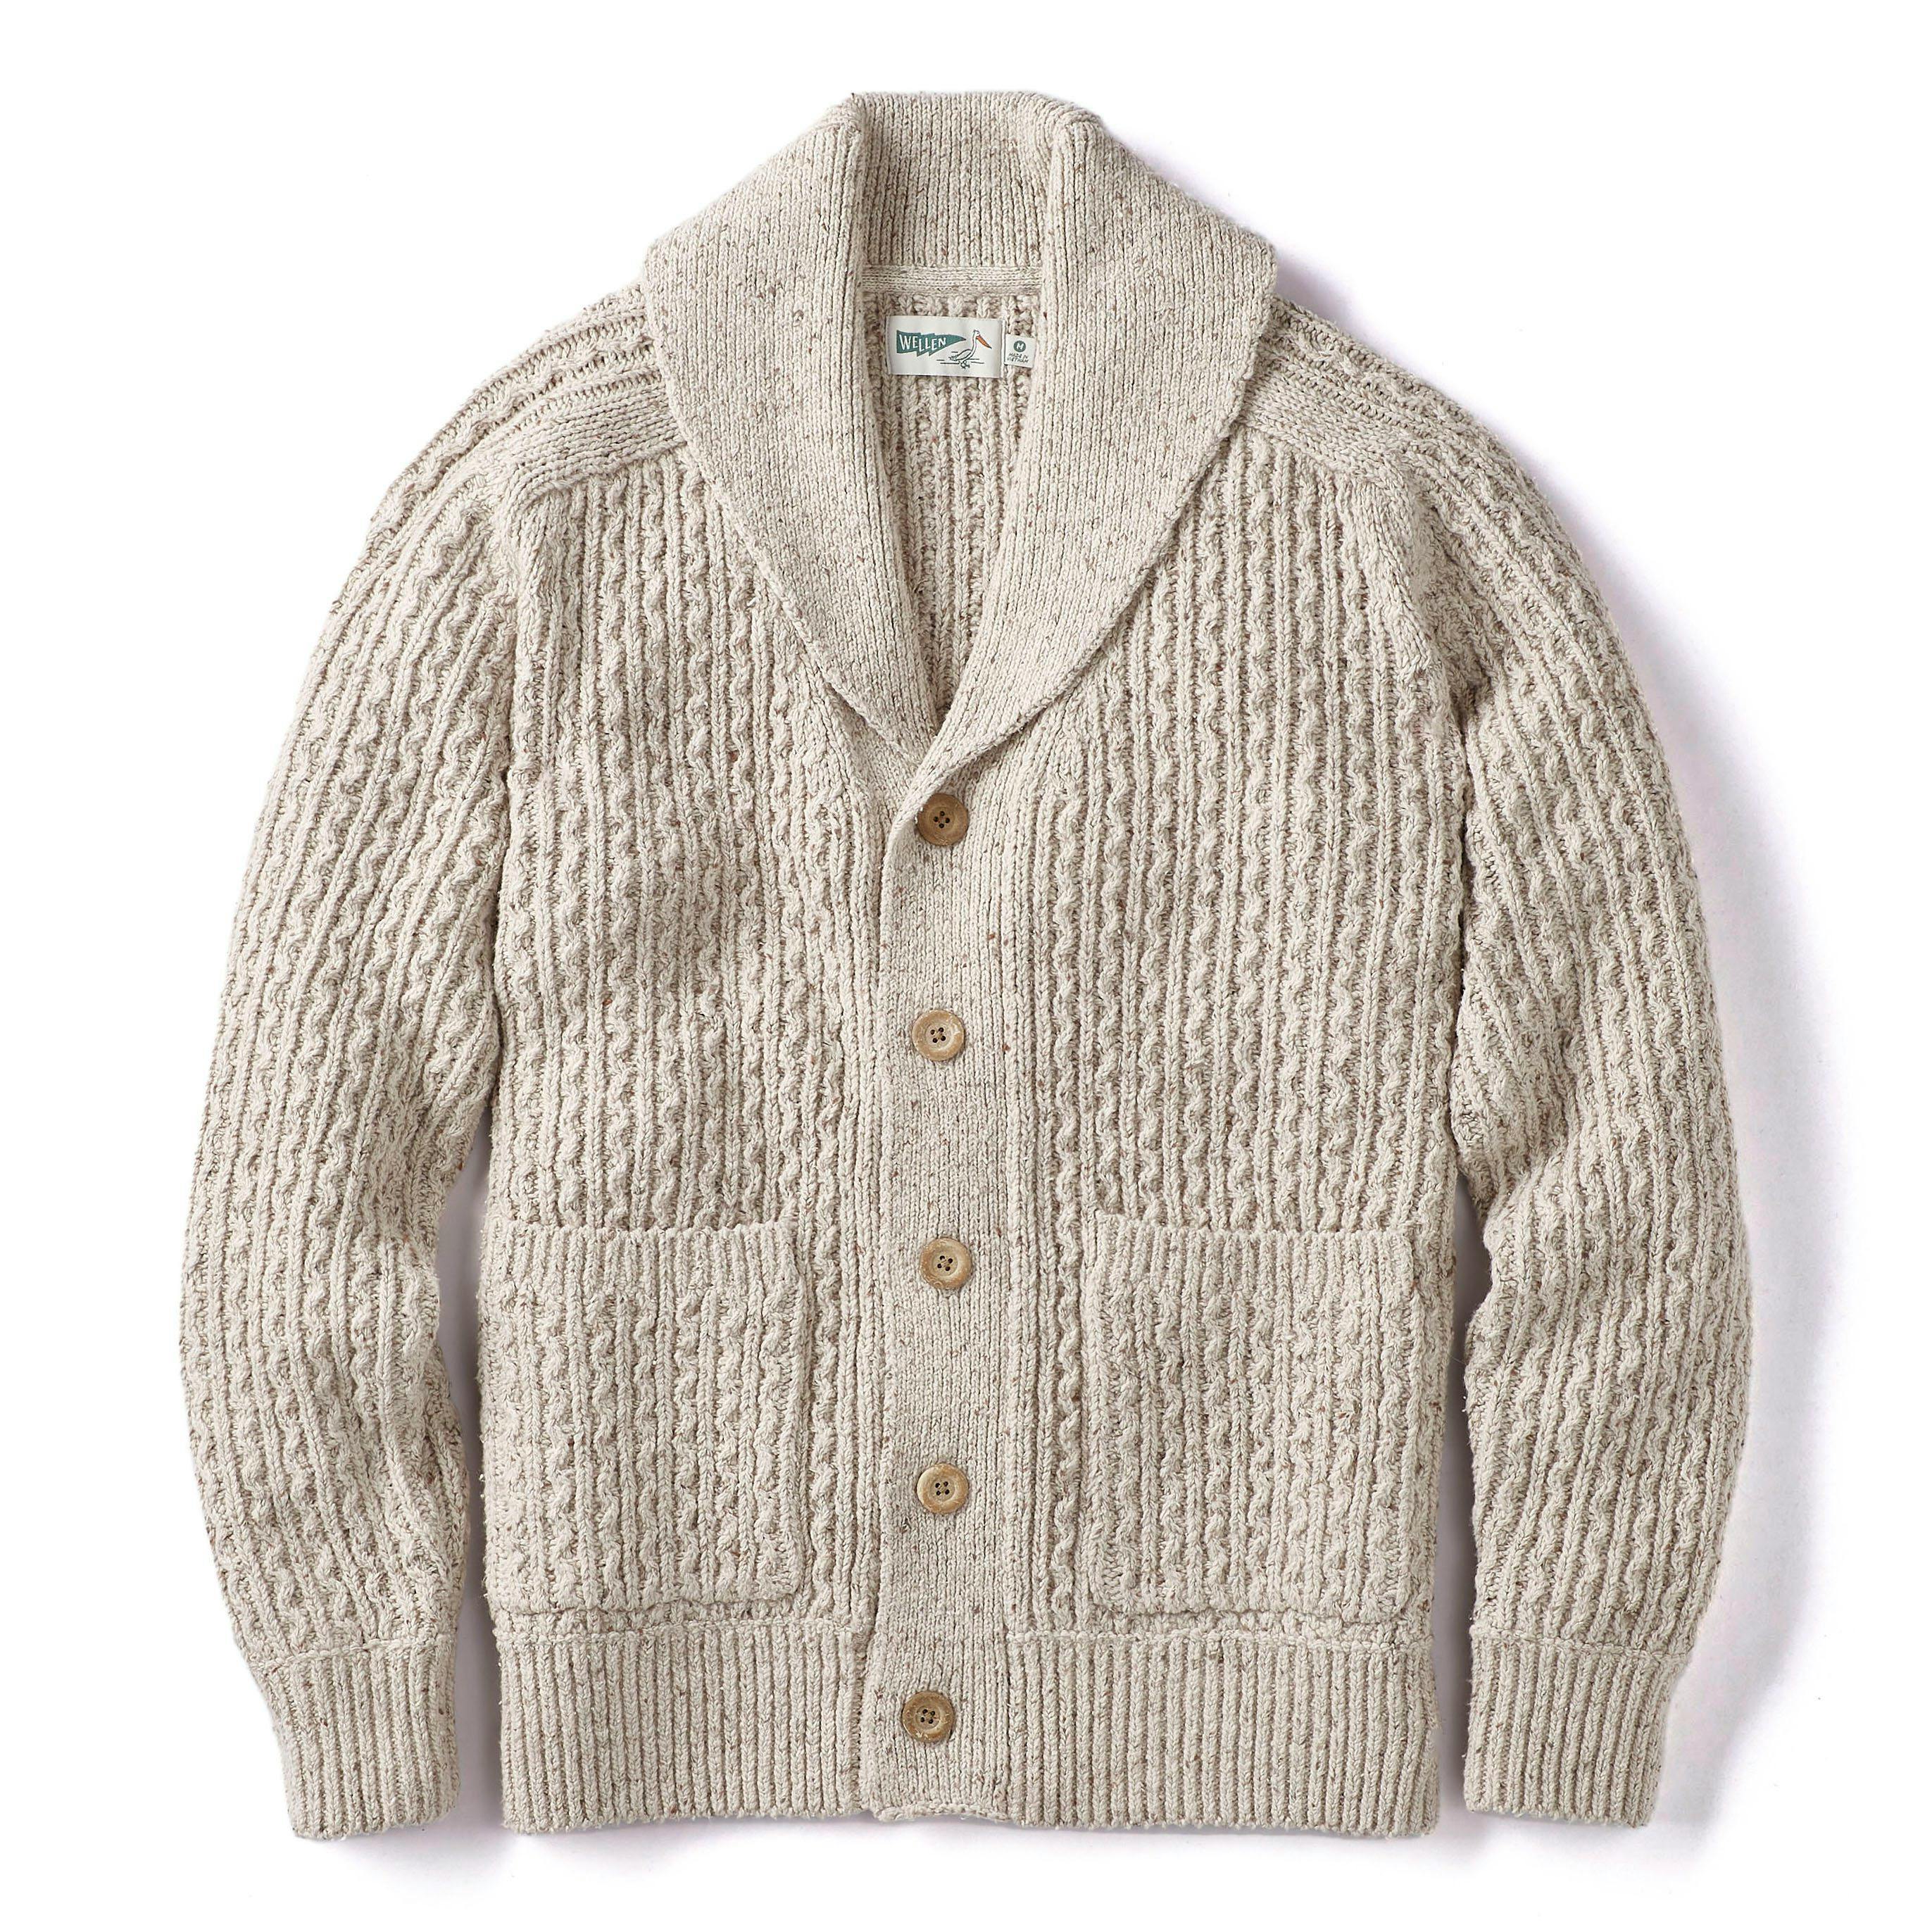 Recycled Cotton Headlands Cardigan Sweater